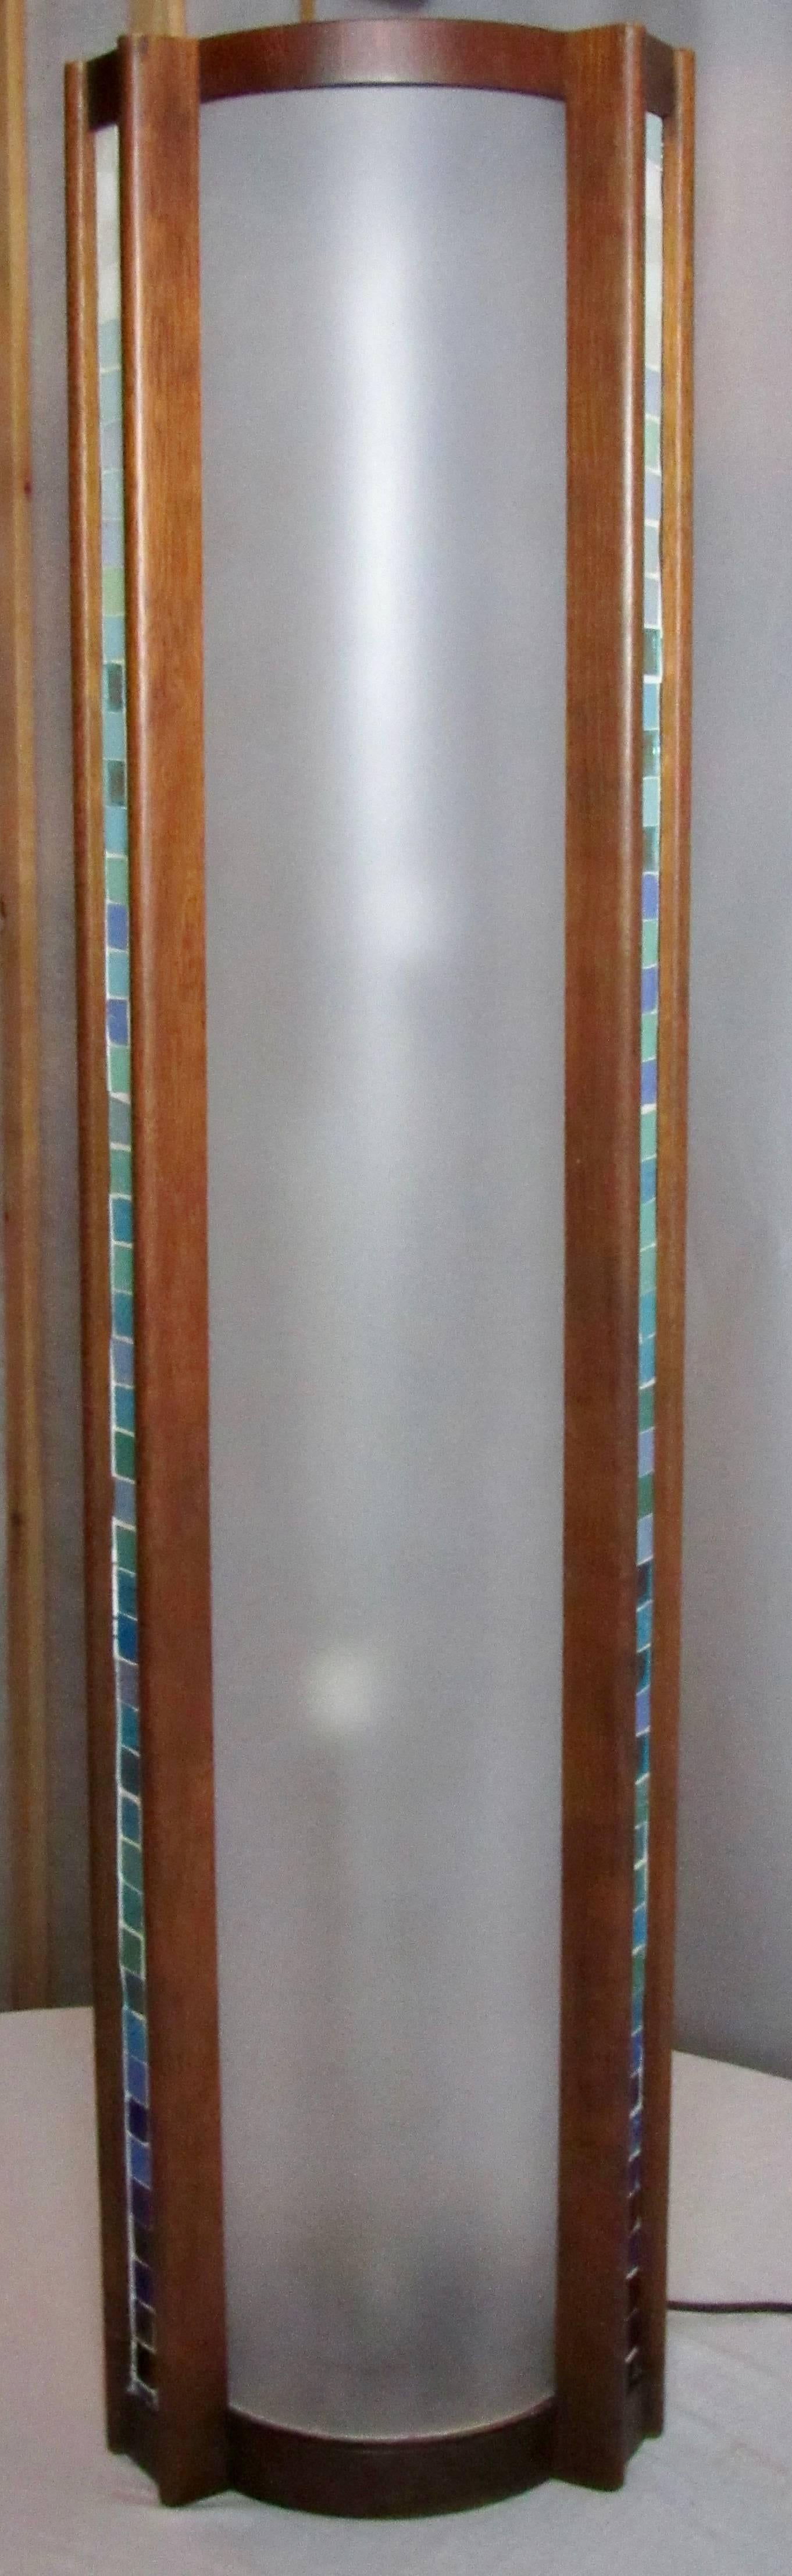 Mid-20th Century Walnut Martin Borenstein Cylindrical Lamp with Glass Tile Panels, circa 1952